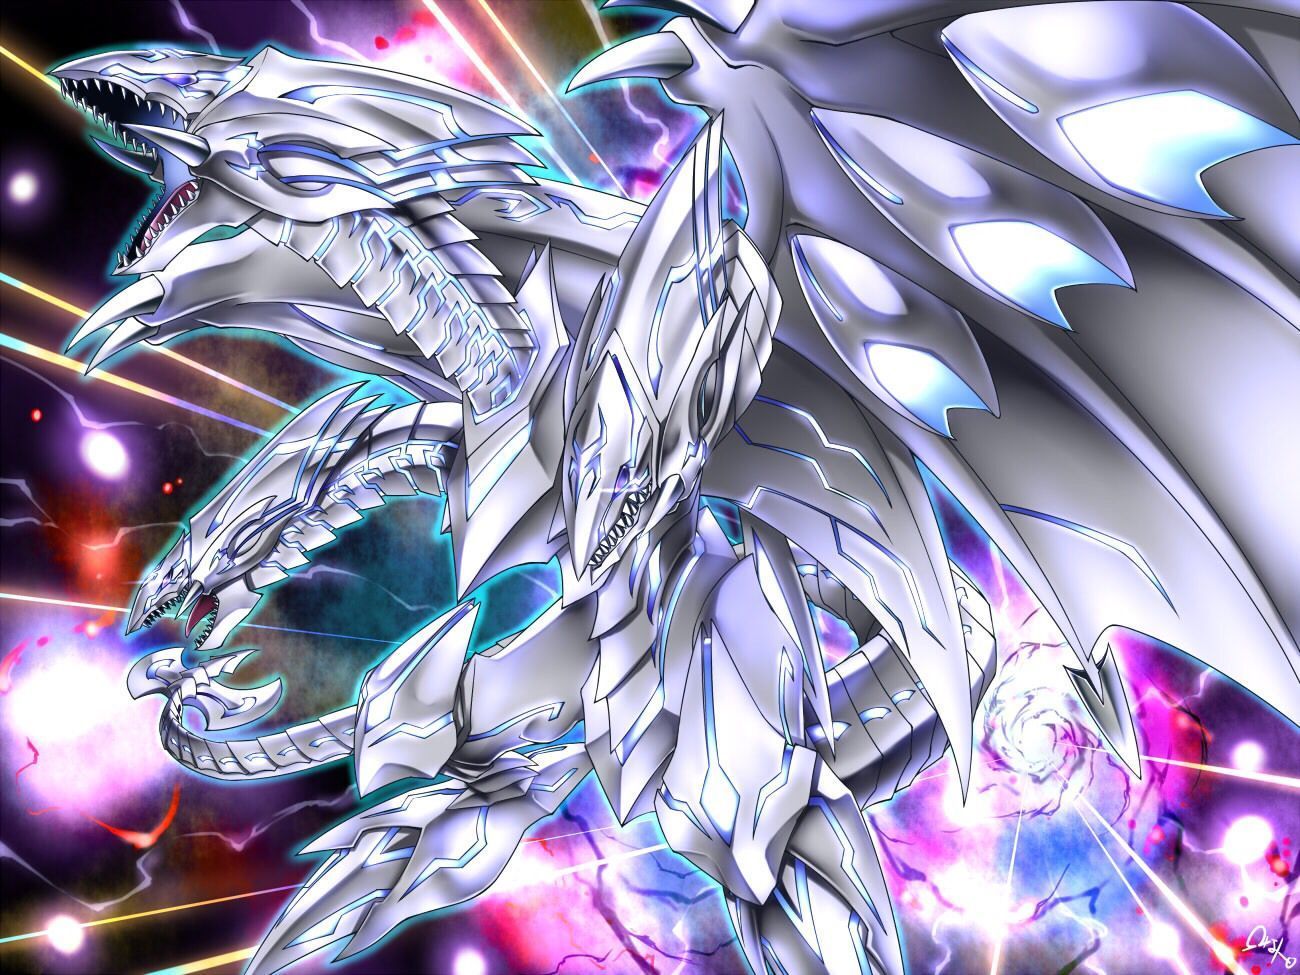 The StarLight Dragon, Blue Dragon Emperor (Completed). Yugioh dragons, Yugioh monsters, Anime